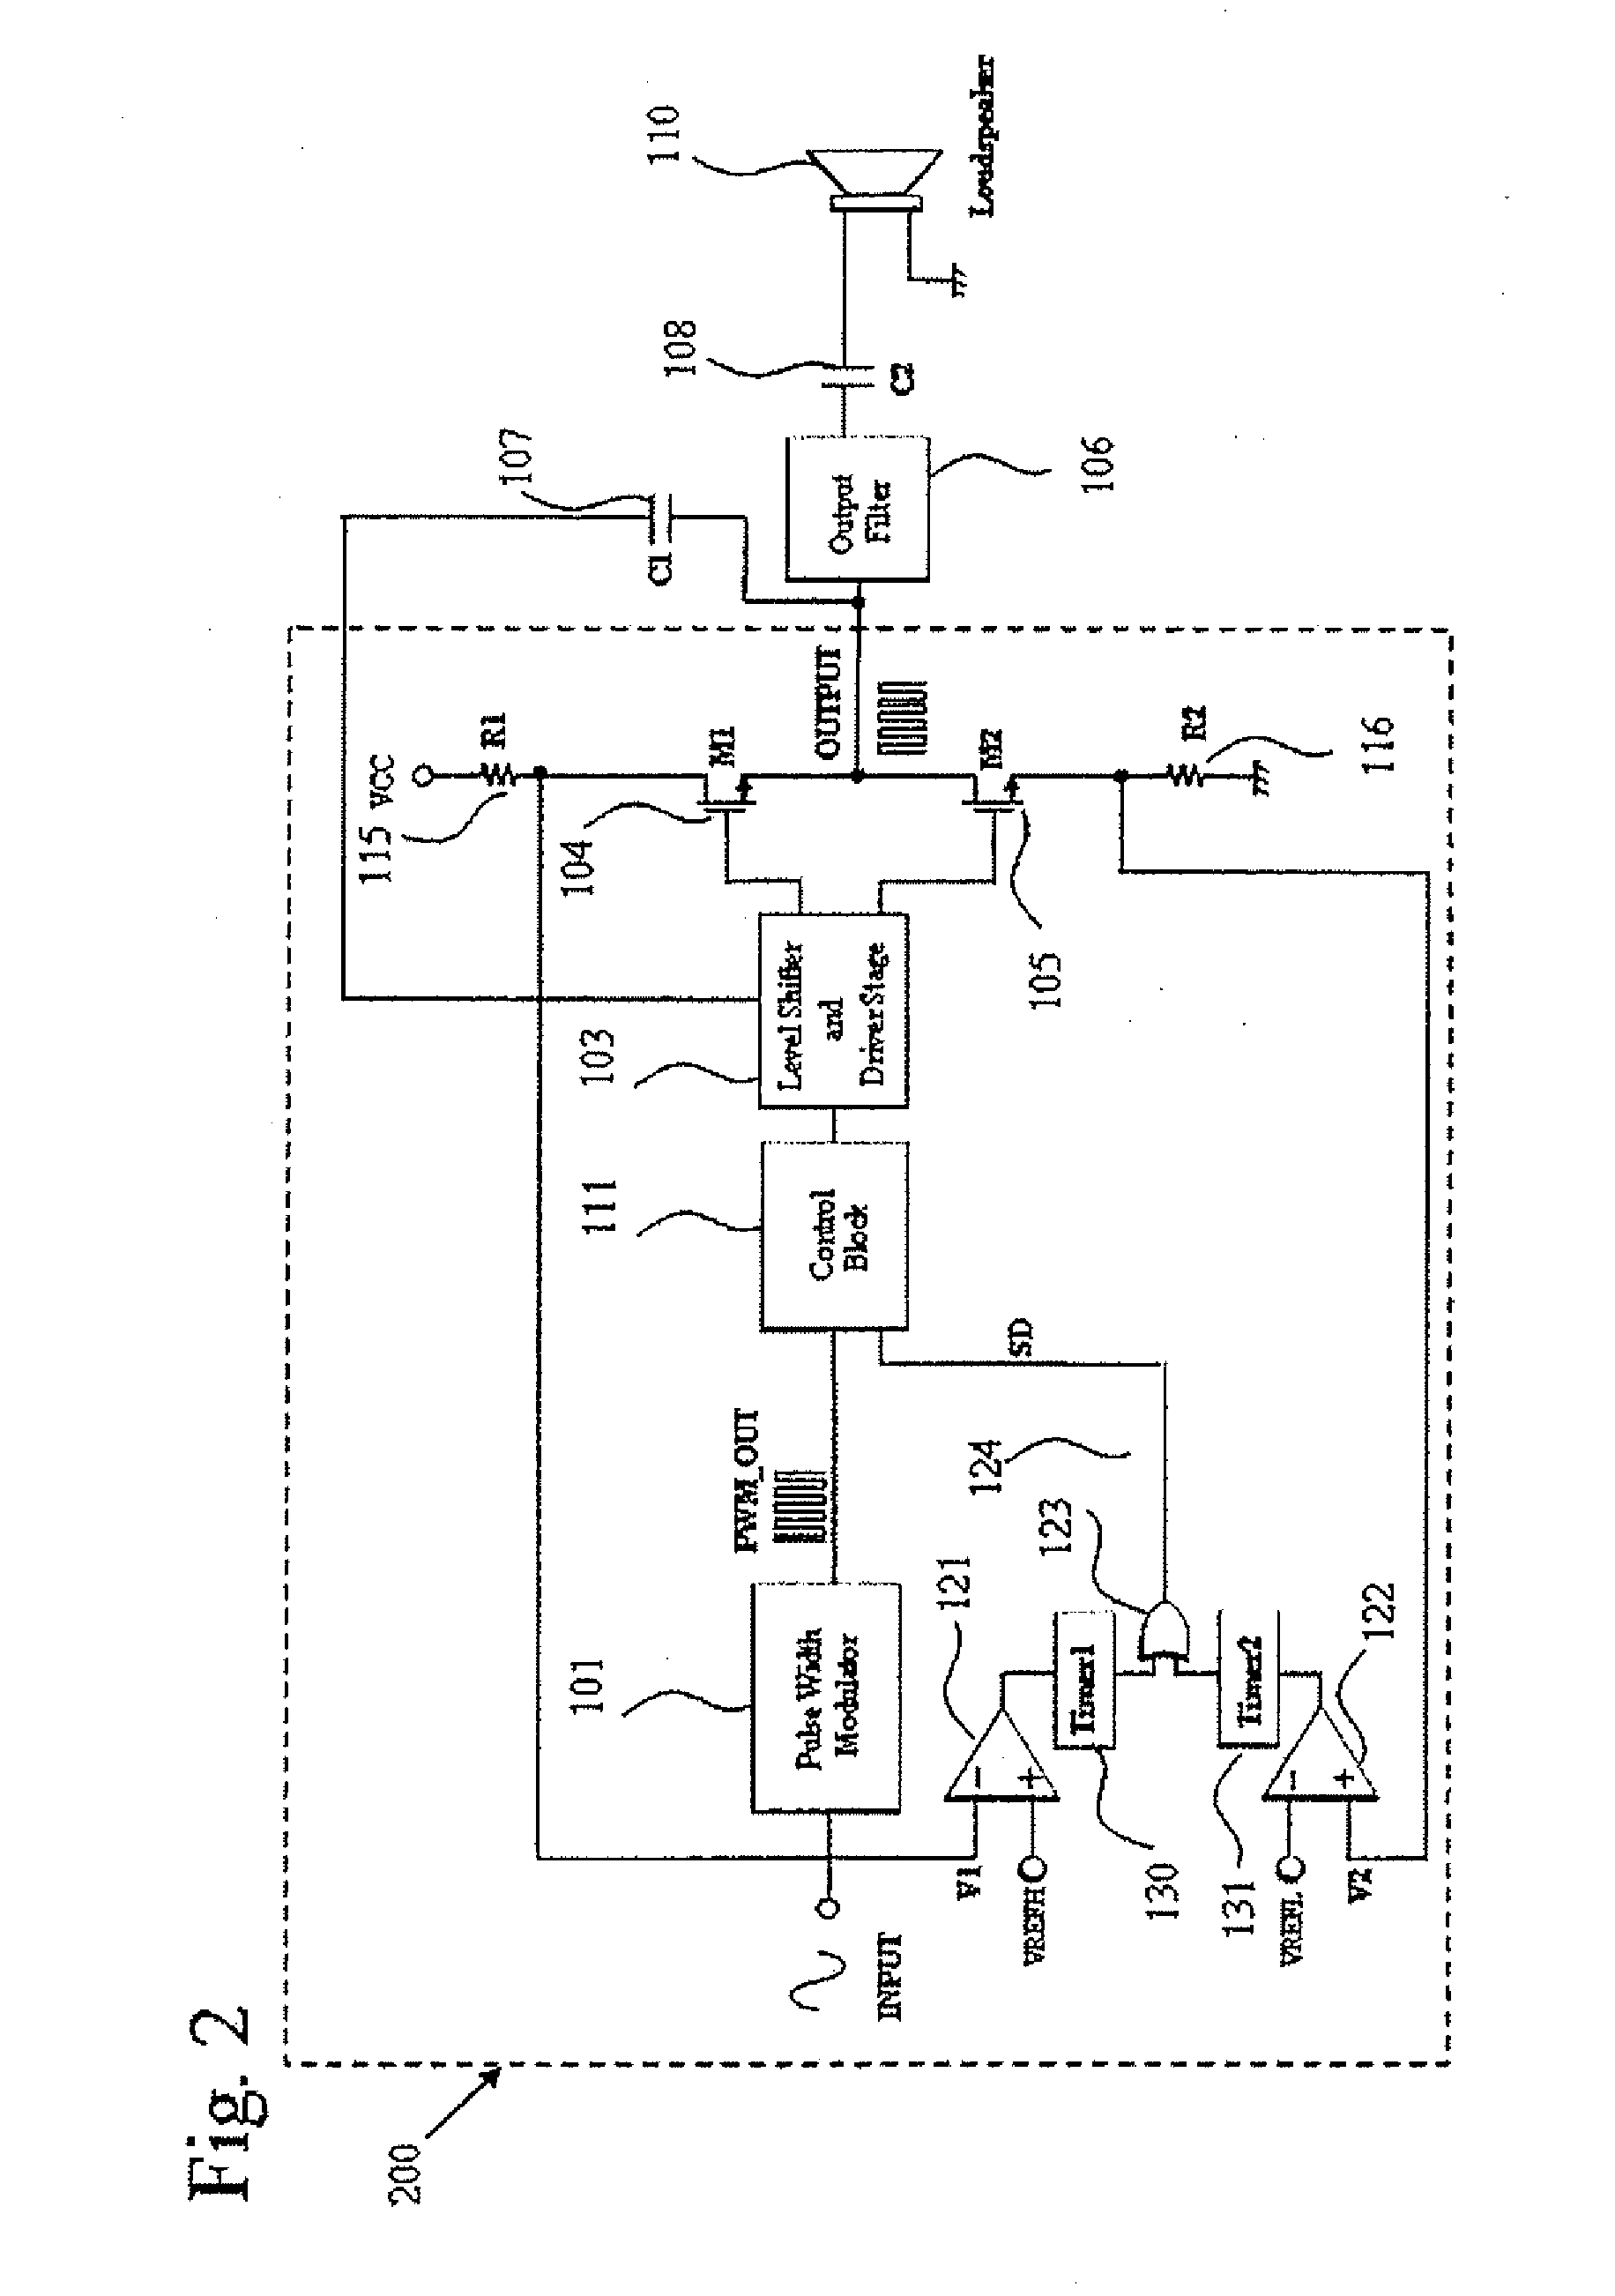 Timer reset circuit for overcurrent protection of switching power amplifier